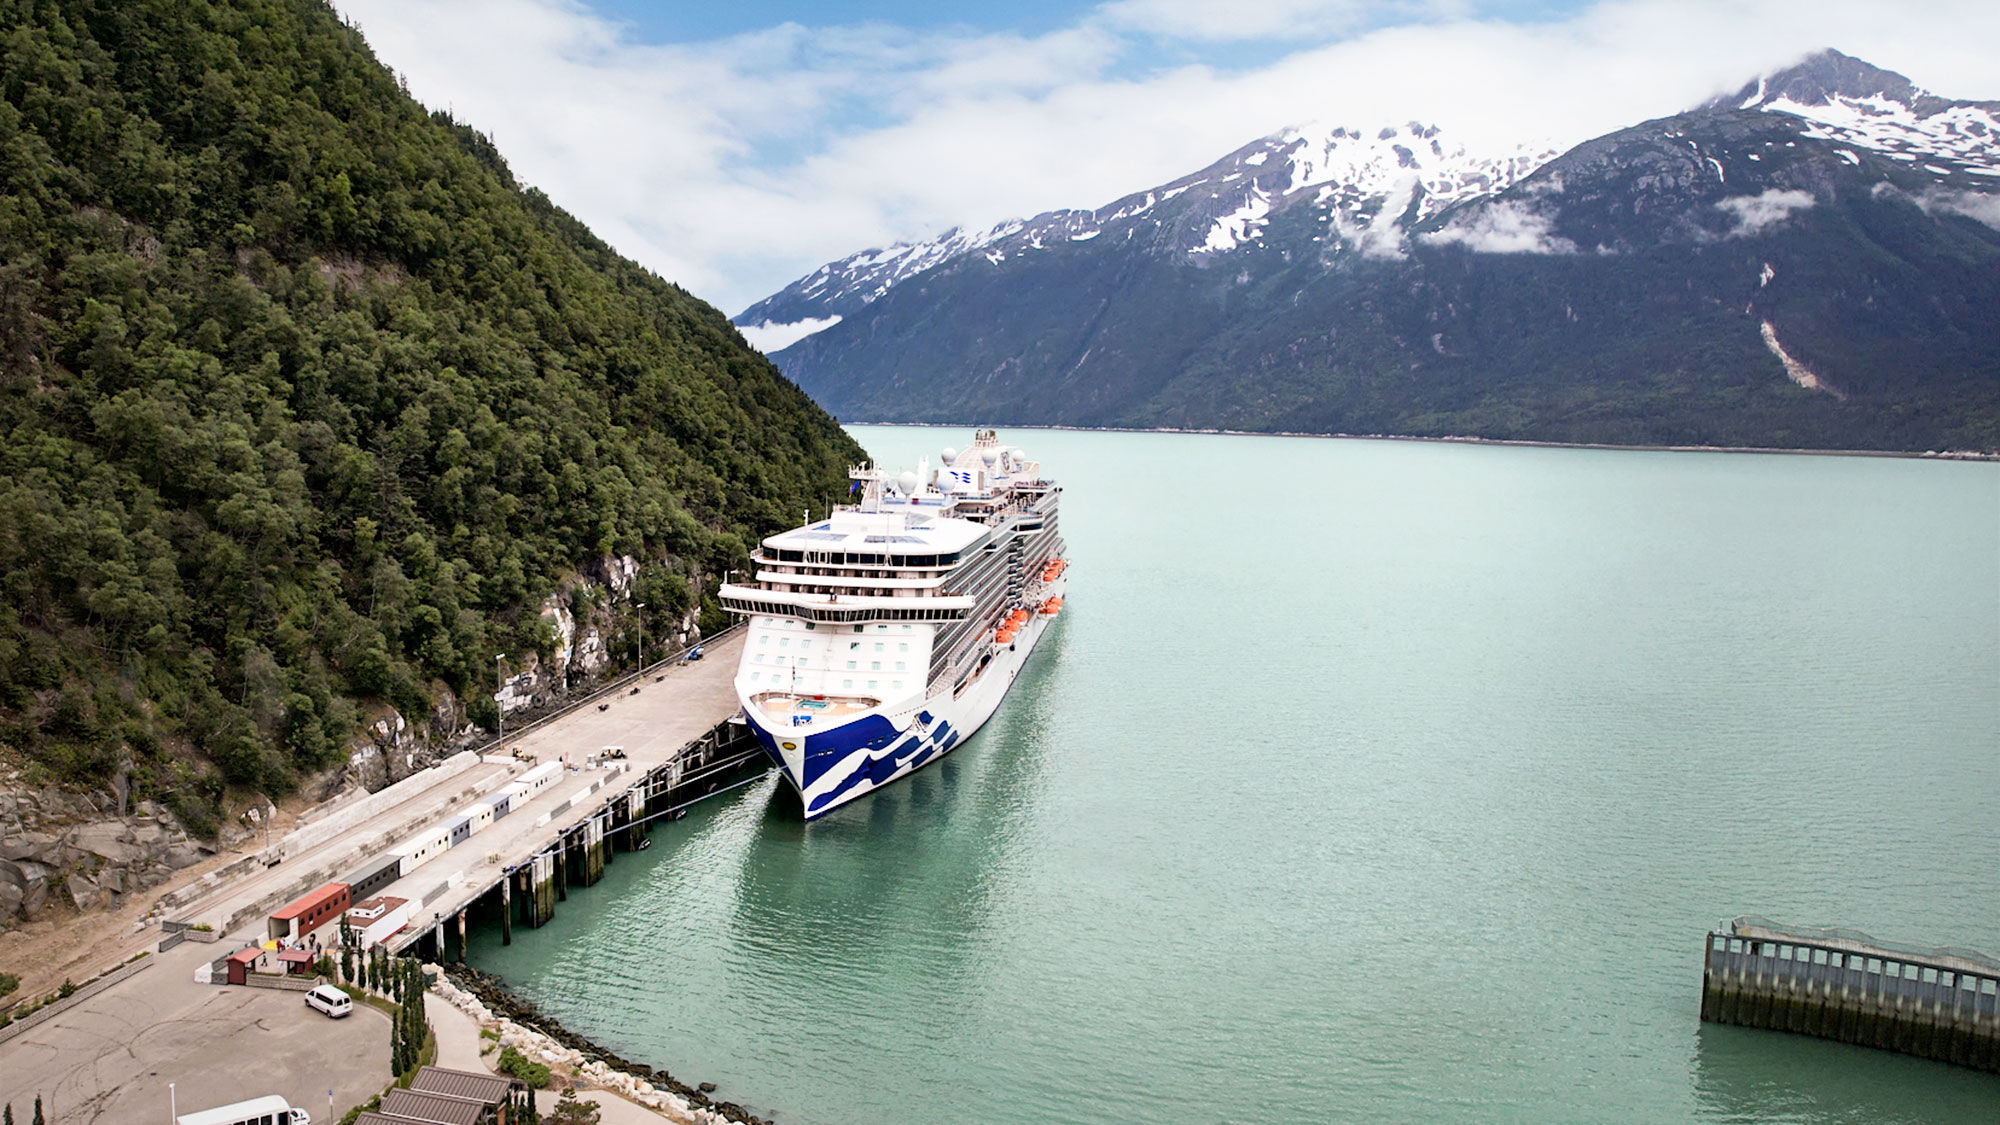 Cruise pier in Skagway, Alaska, closes due to rockslide risk: Travel Weekly